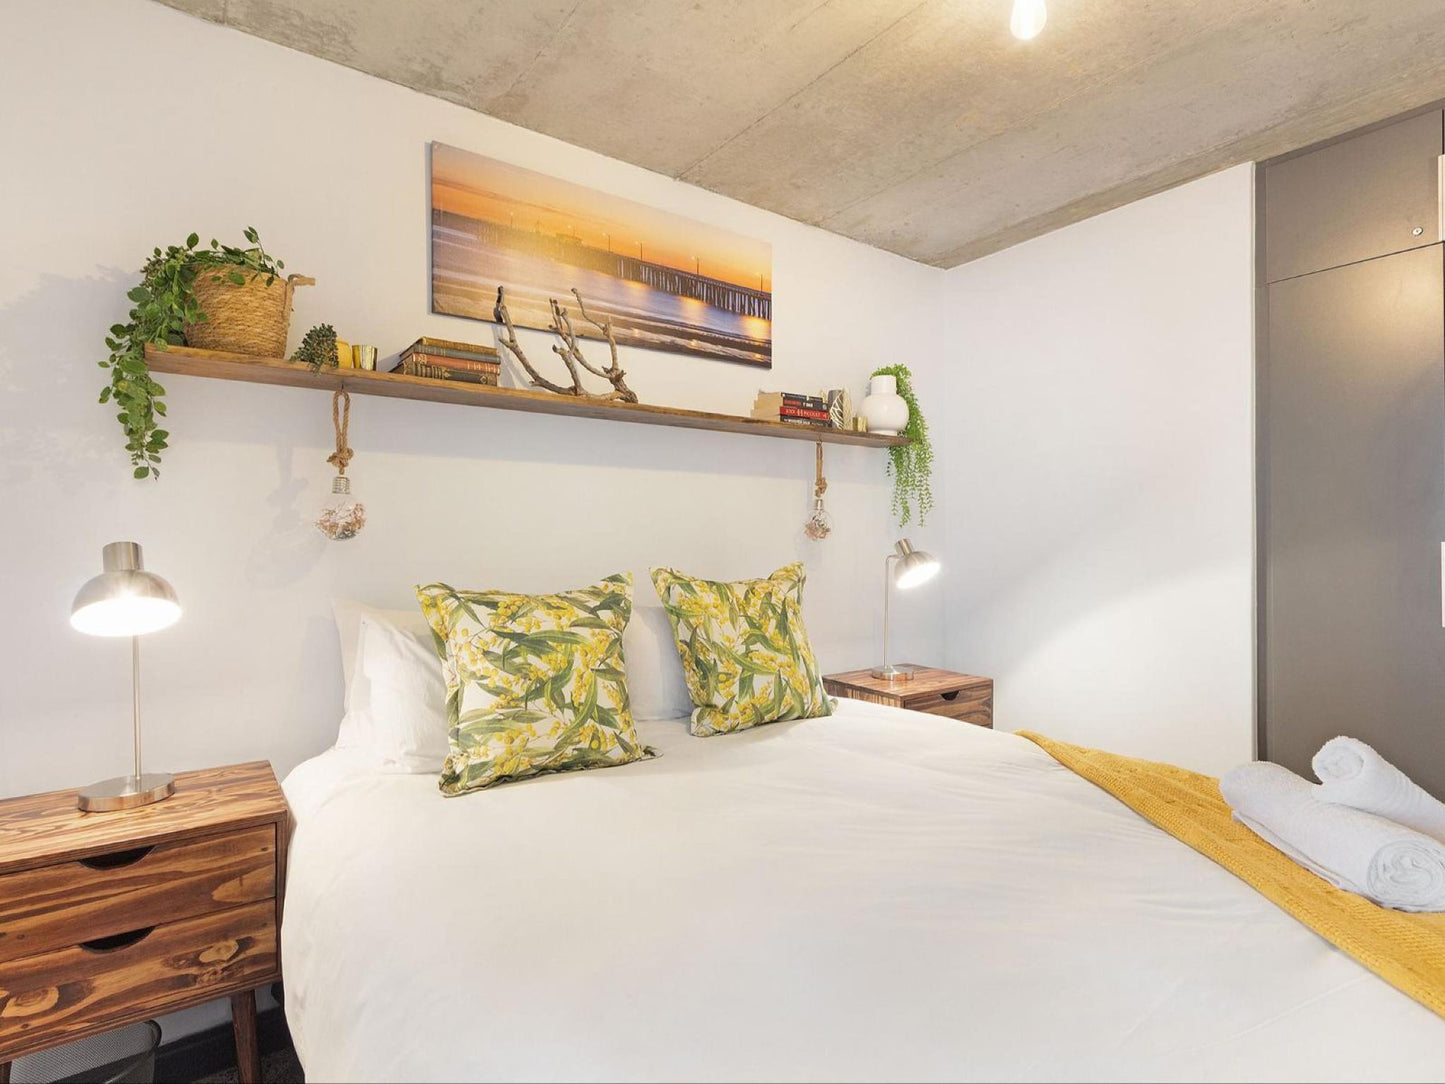 Manhattan On Coral 28 By Hostagents West Beach Blouberg Western Cape South Africa Bedroom